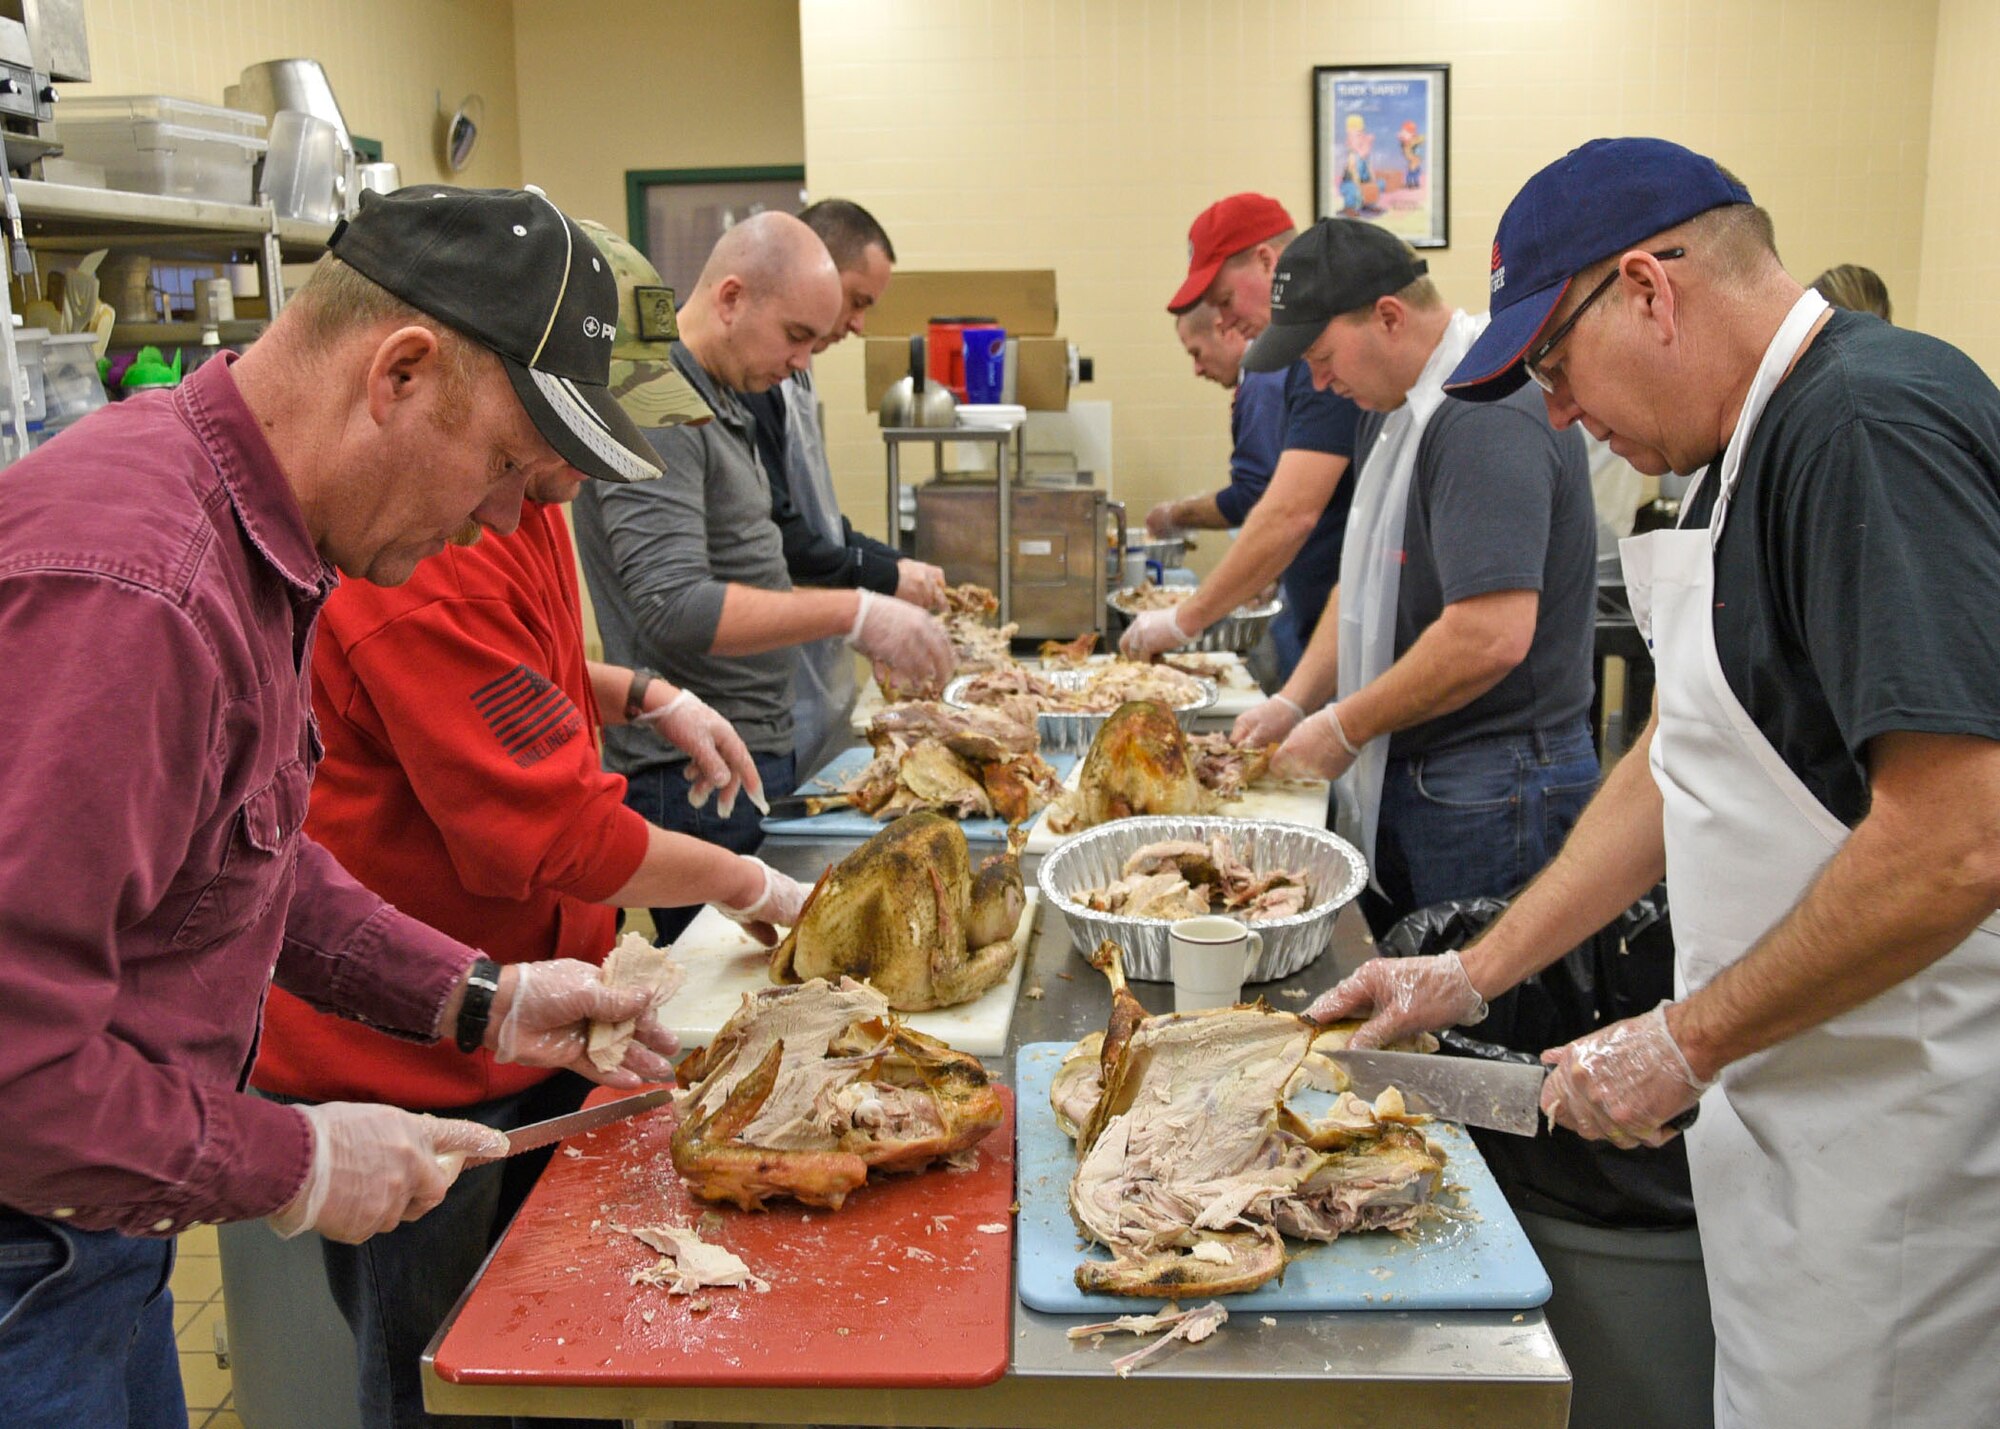 Volunteers from the Montana Air National Guard carve turkeys on Christmas Eve to be served at the 24th annual Danny Berg Memorial Christmas Dinner. This year 50 turkeys were cooked at the 120th Airlift Wing's Dining Facility for the community meal hosted at the Great Falls Senior Citizens Center. (U.S. Air National Guard photo by Senior Master Sgt. Eric Peterson/Released)